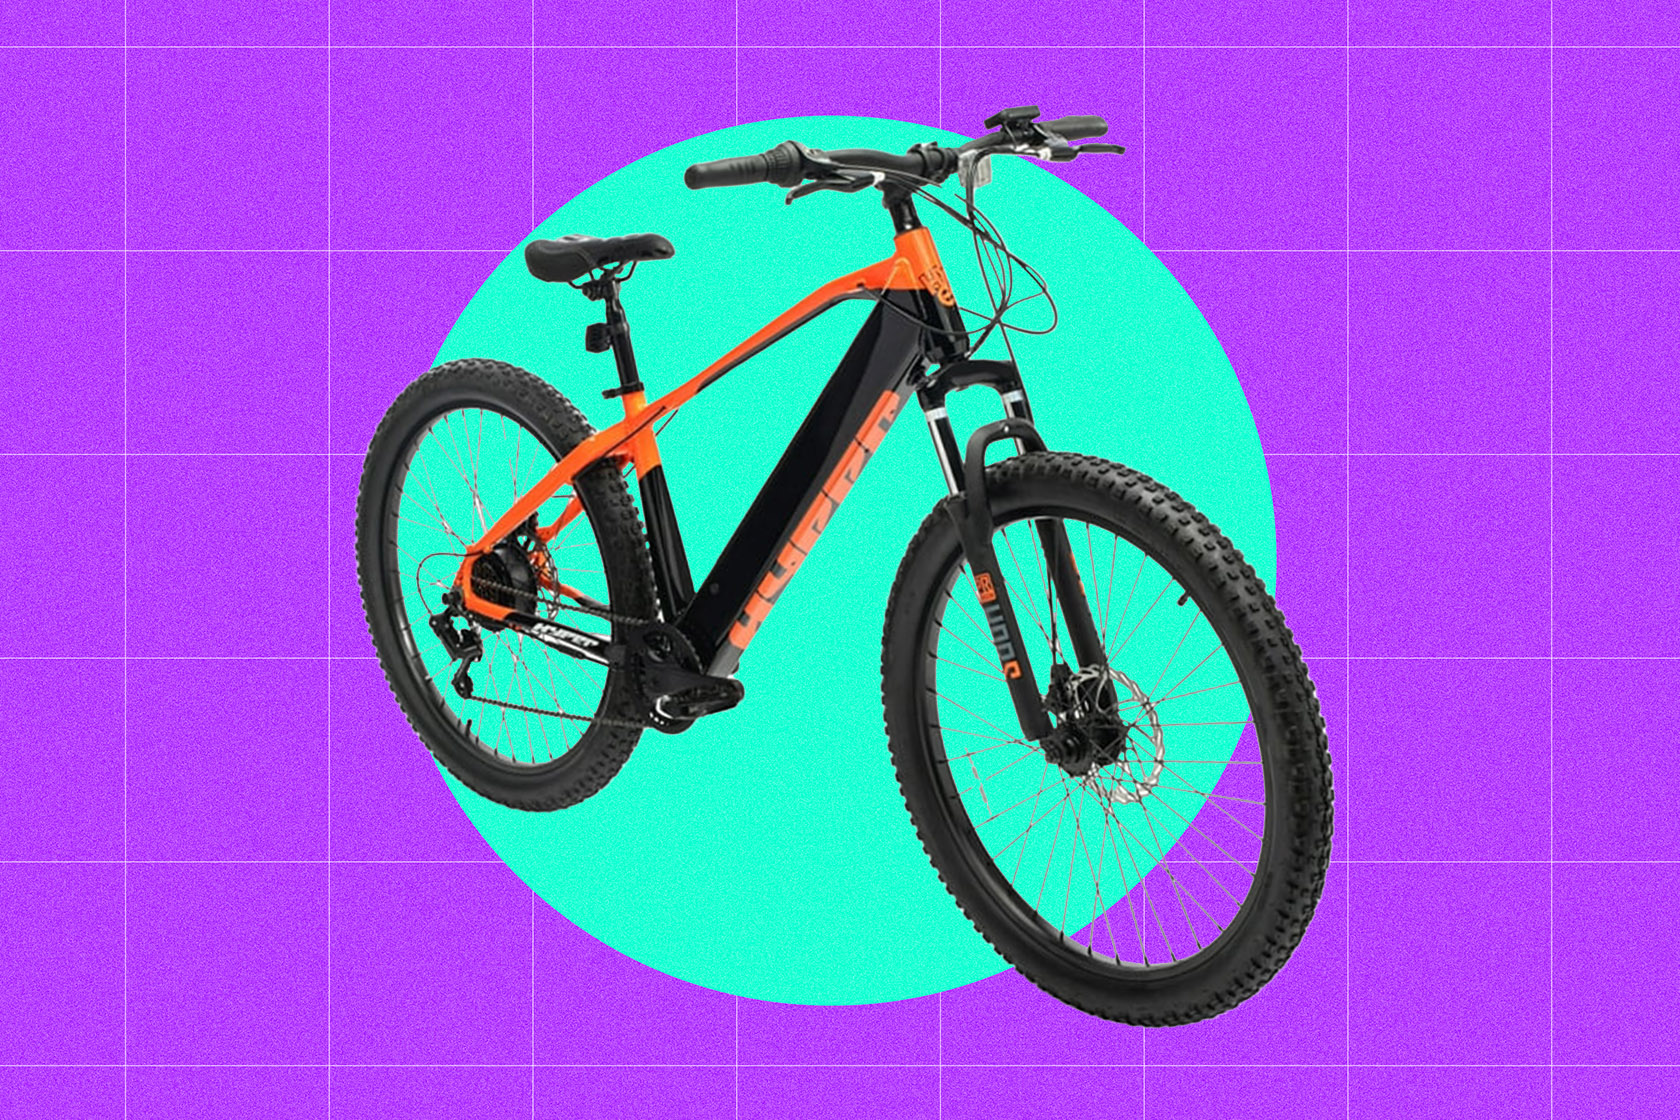 This Popular E-Bike is Over $870 Off For Cyber Monday at Walmart Now - IGN